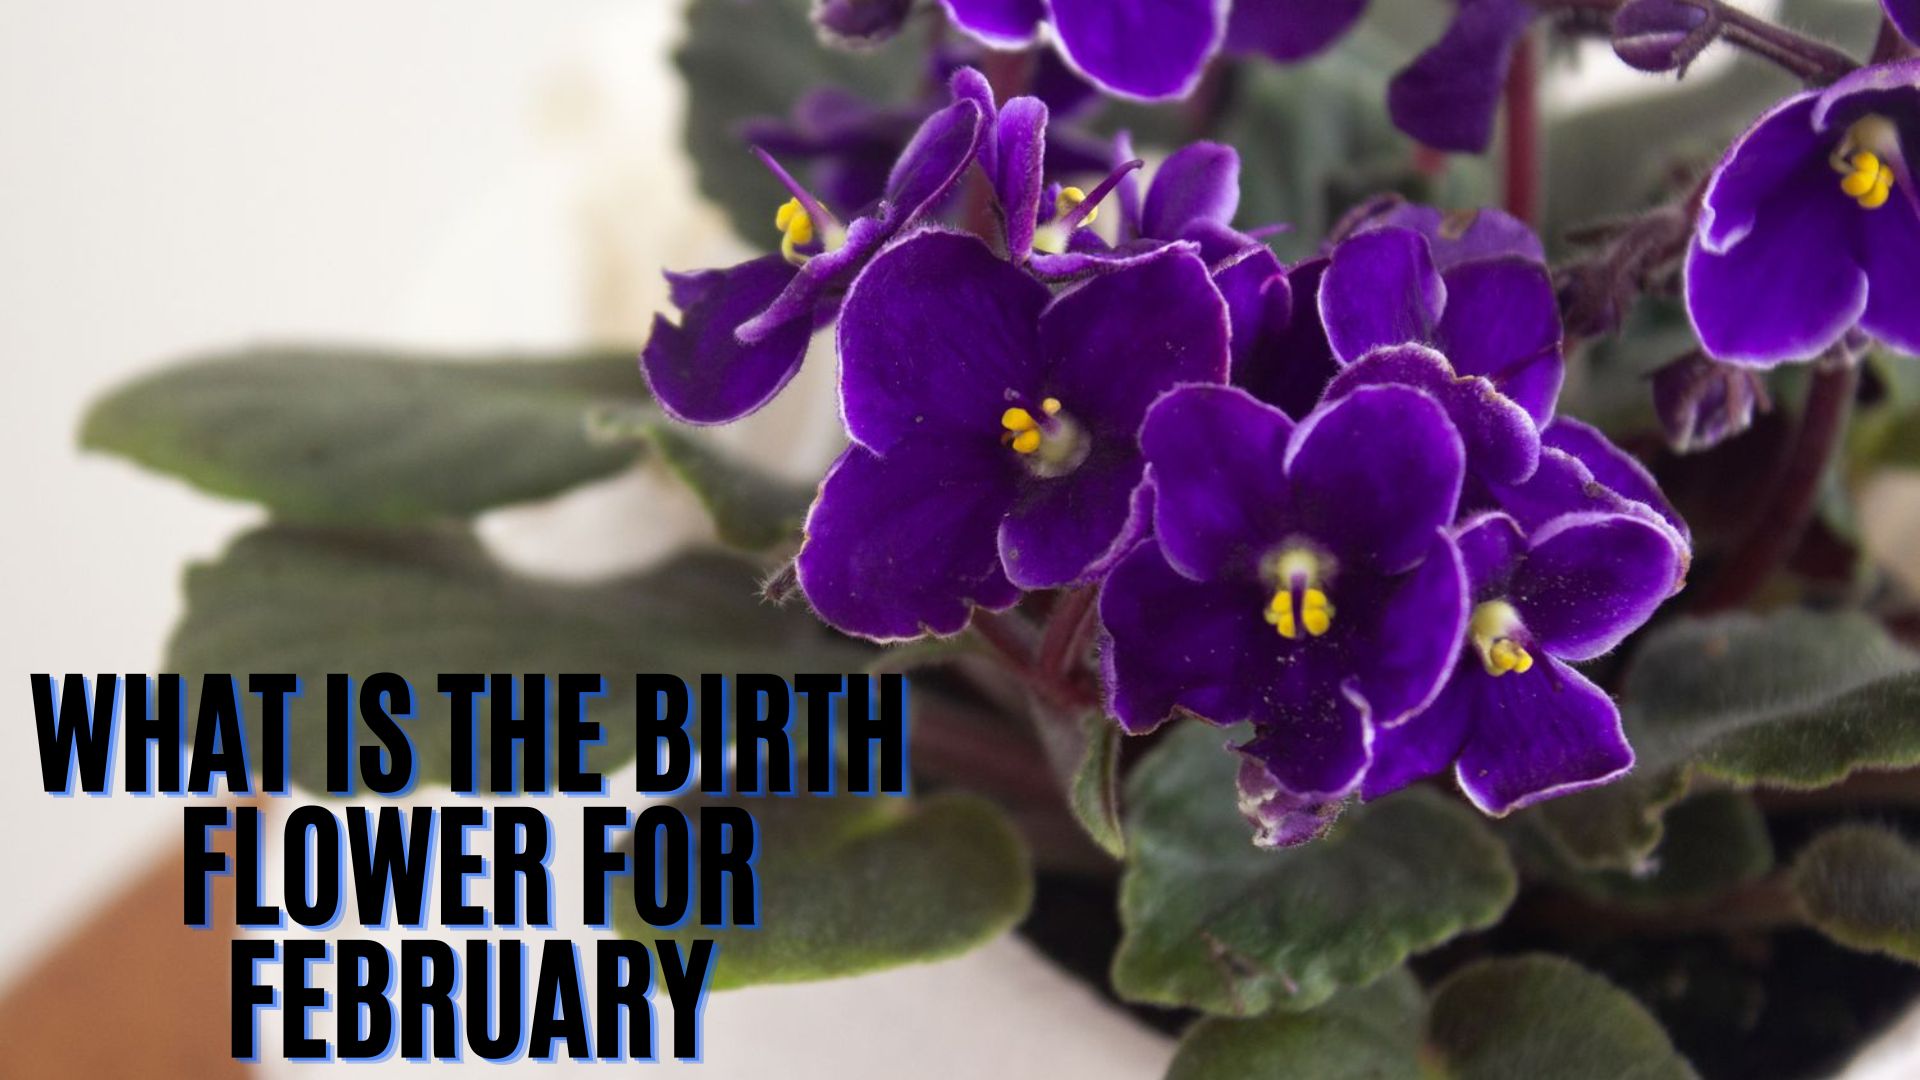 What Is The Birth Flower For February?